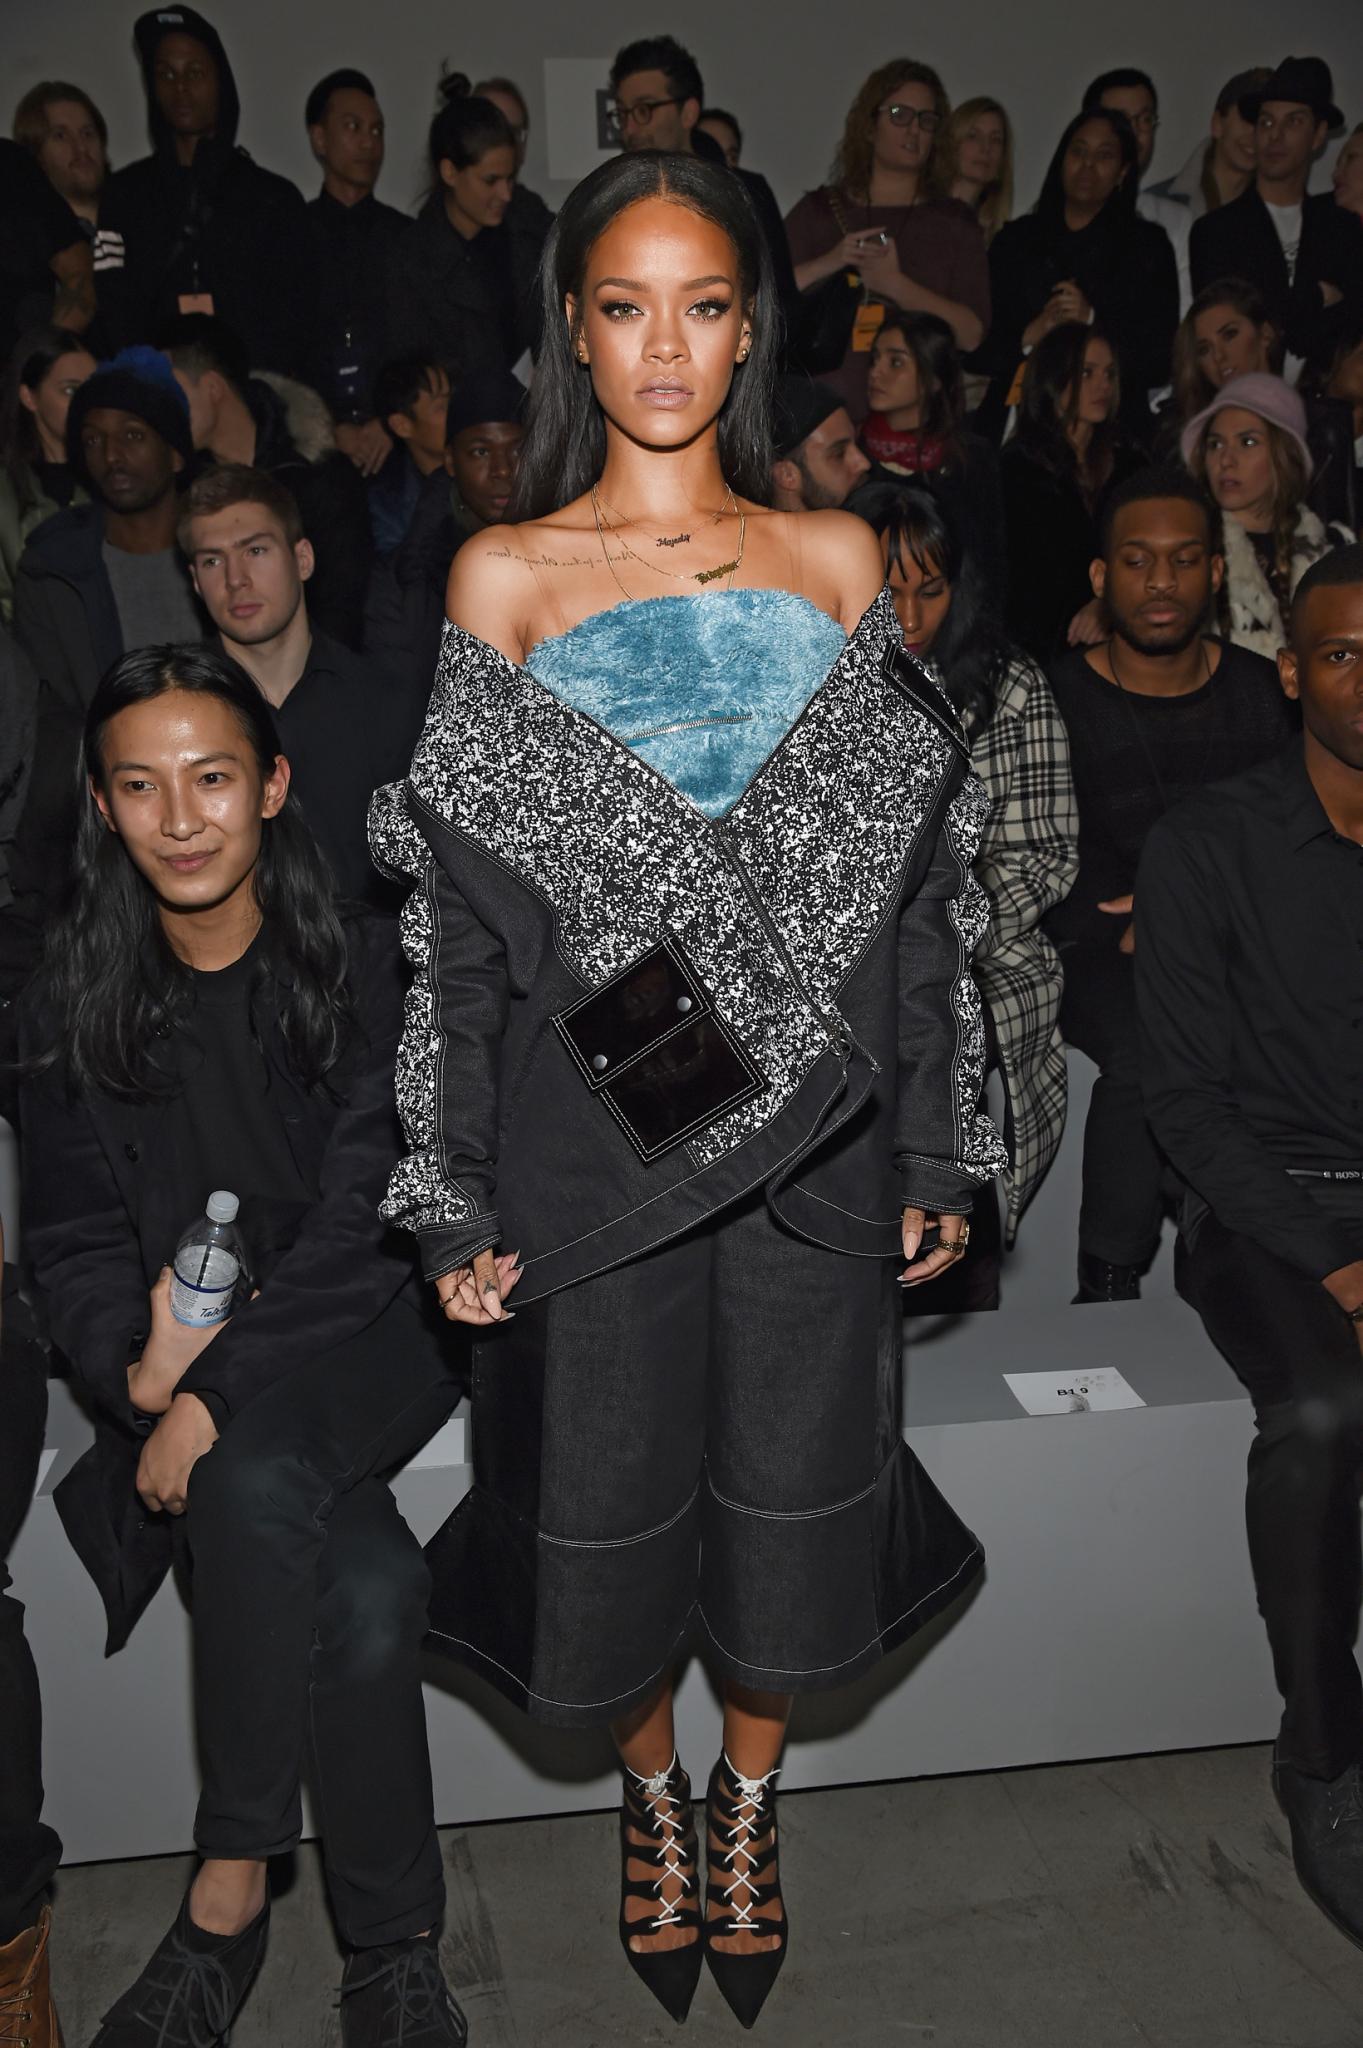 Rihanna Keeps It 100 In 100 Mind-Blowing Style Moments
